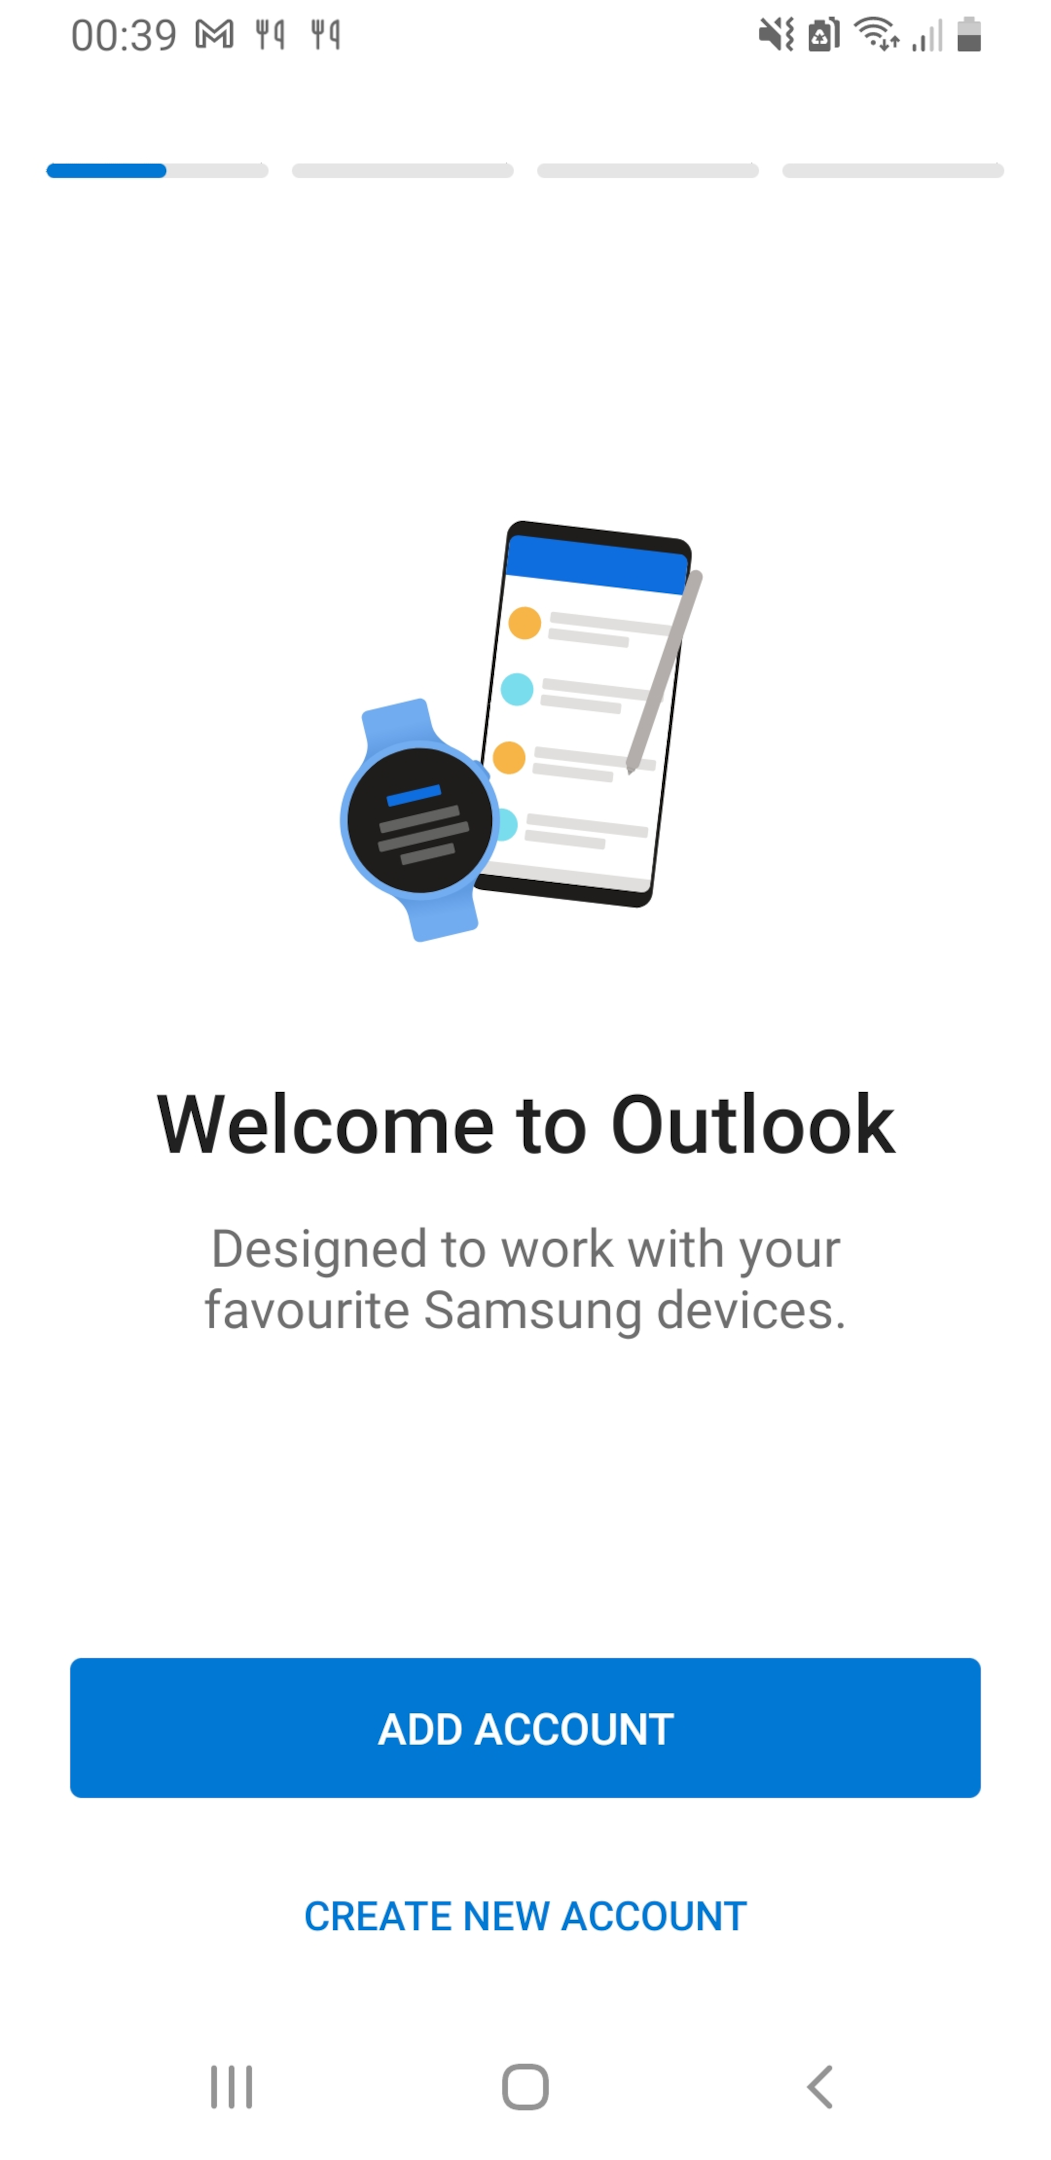 Open the outlook app on your mobile device